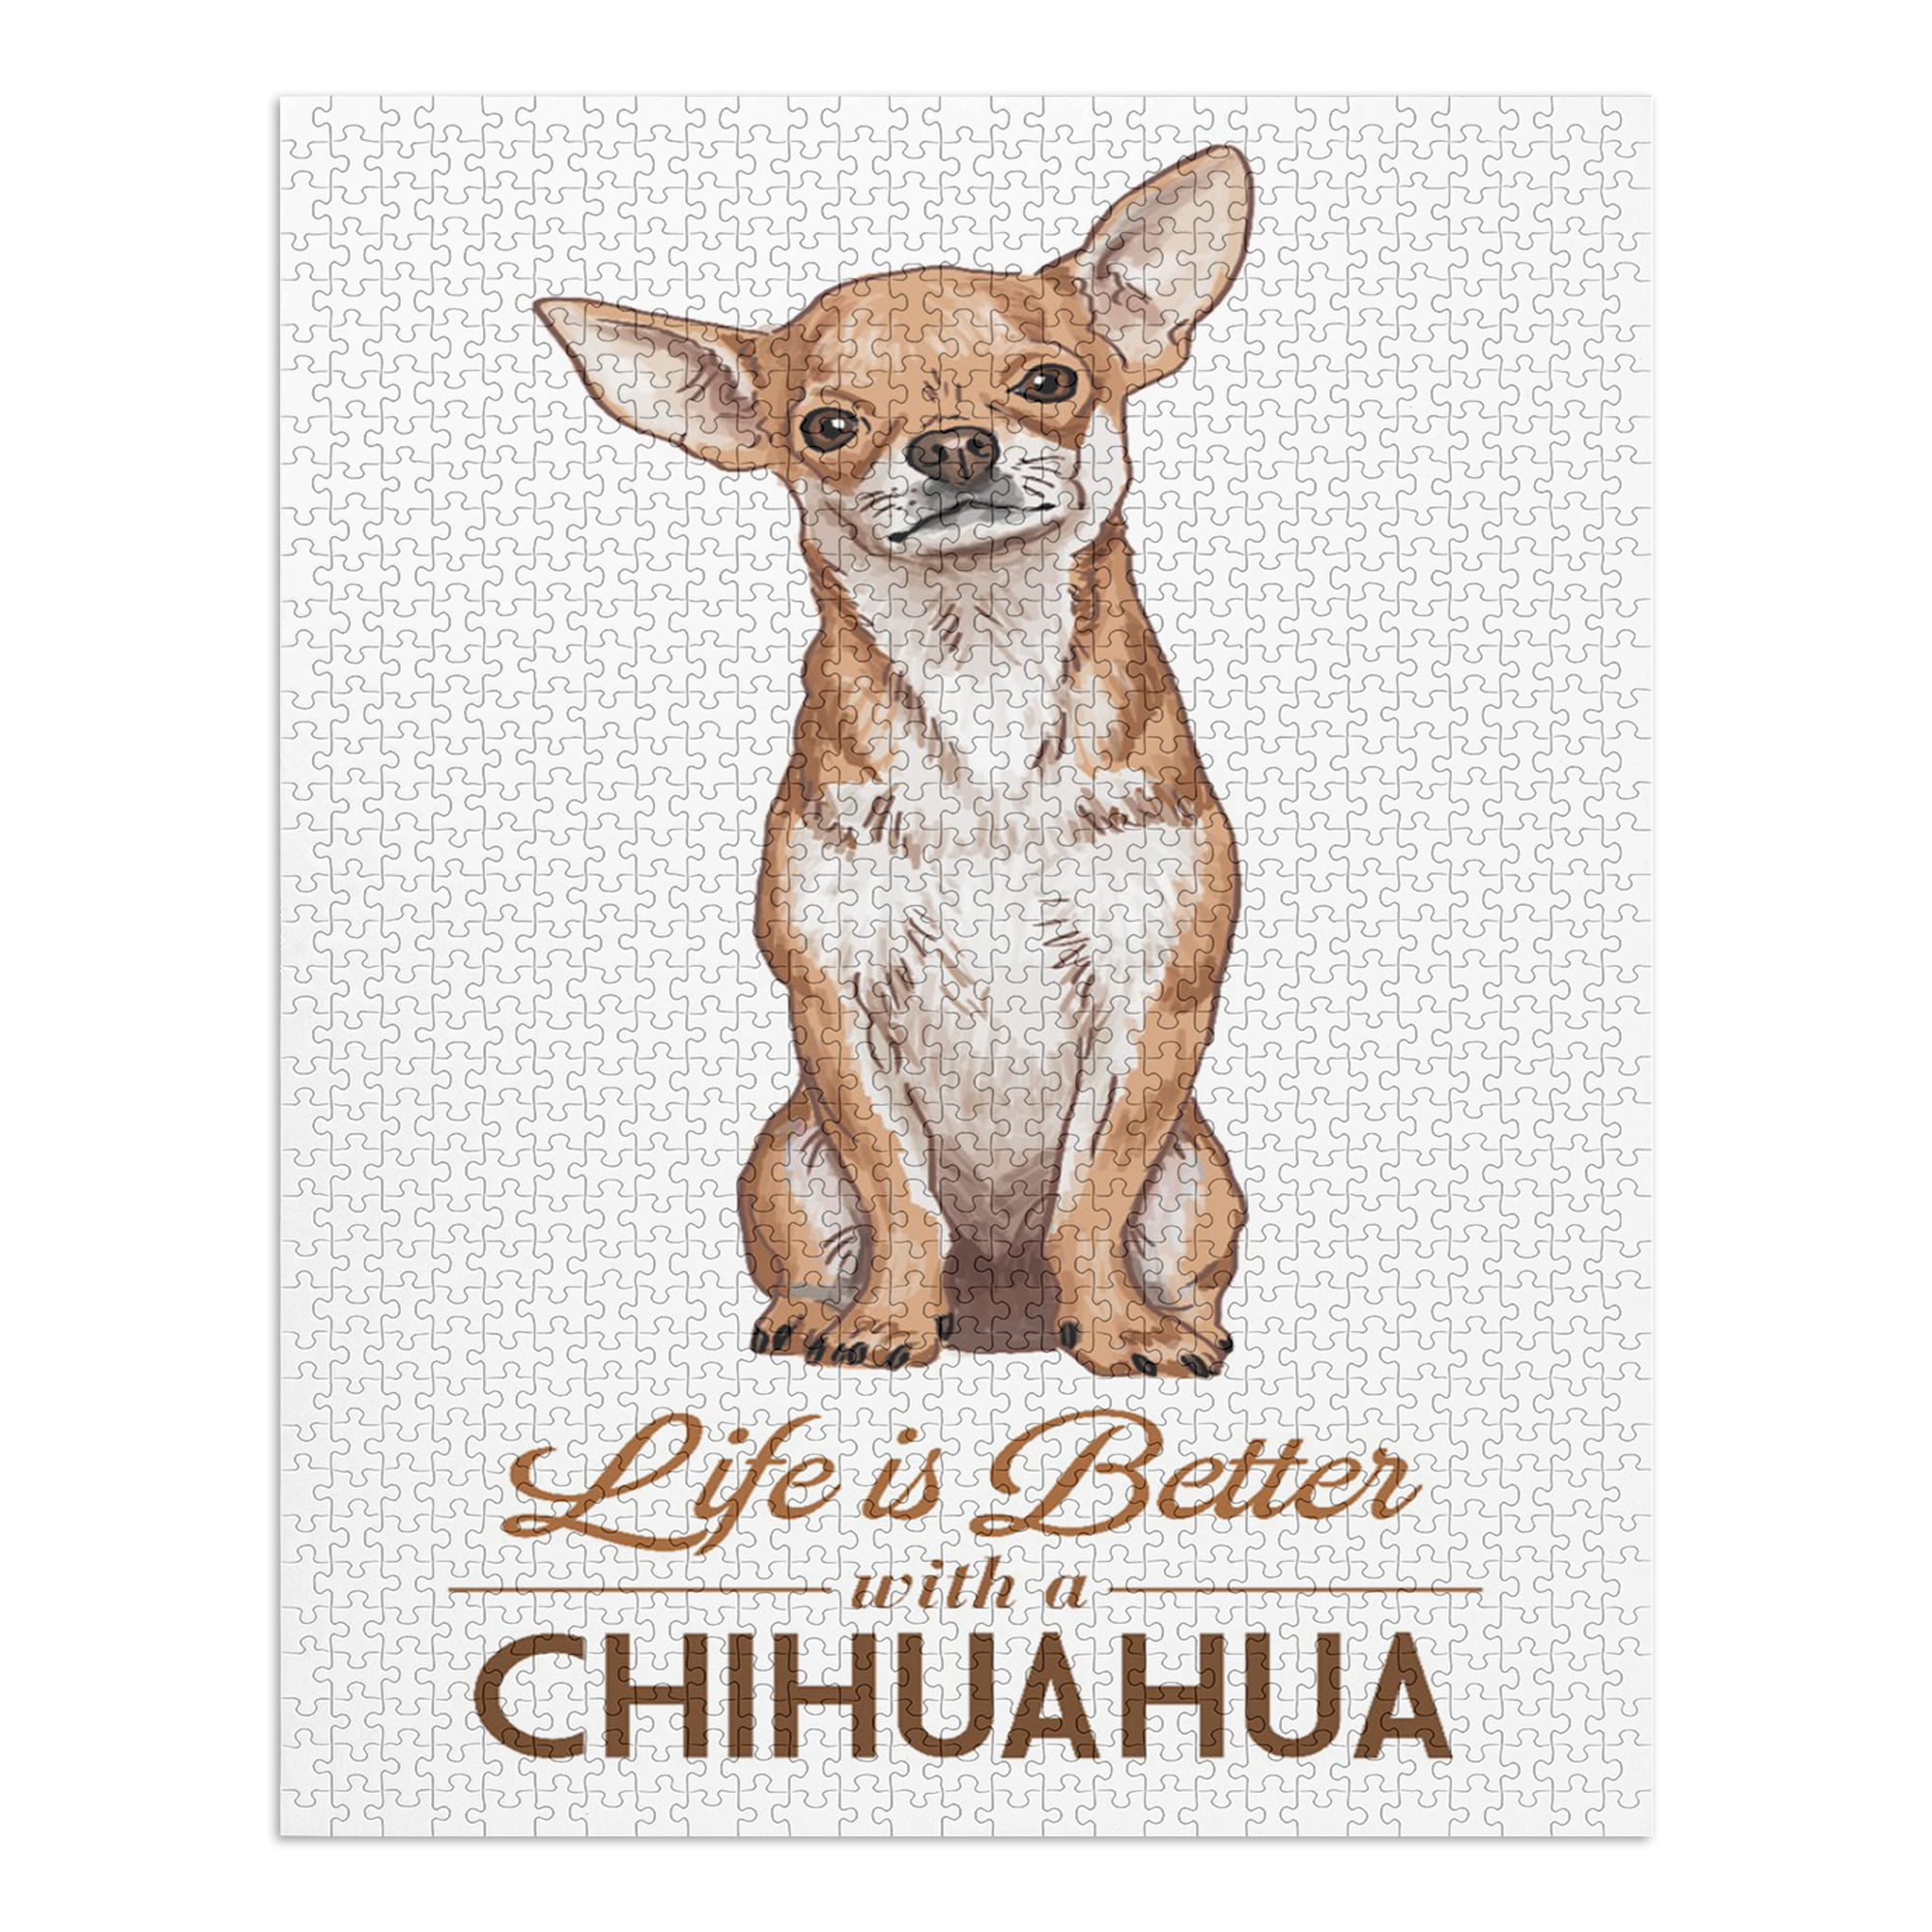 Chihuahua, Life is Better, White Background (1000 Piece Puzzle, Size 19x27,  Challenging Jigsaw Puzzle for Adults and Family, Made in USA)